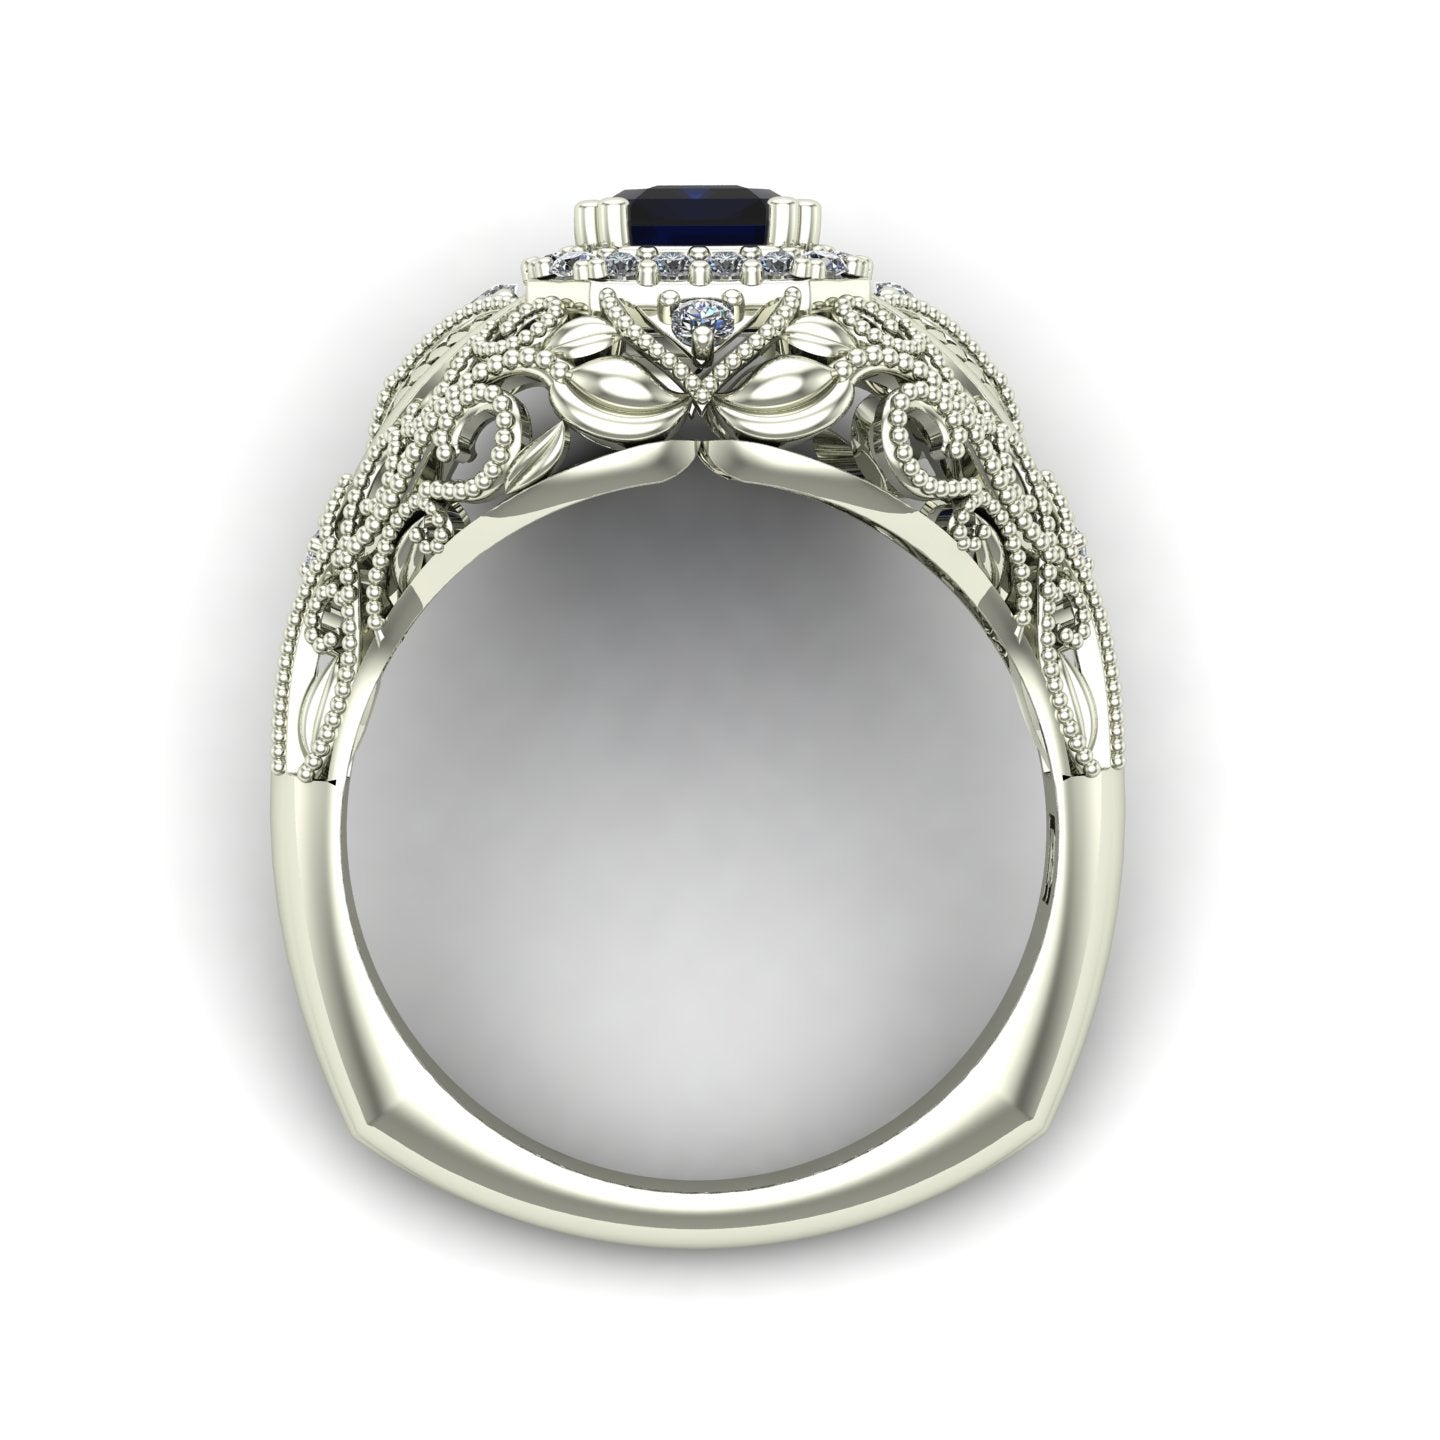 emerald cut blue sapphire and diamond ring with leaves in 14k white gold - Charles Babb Designs - through finger view